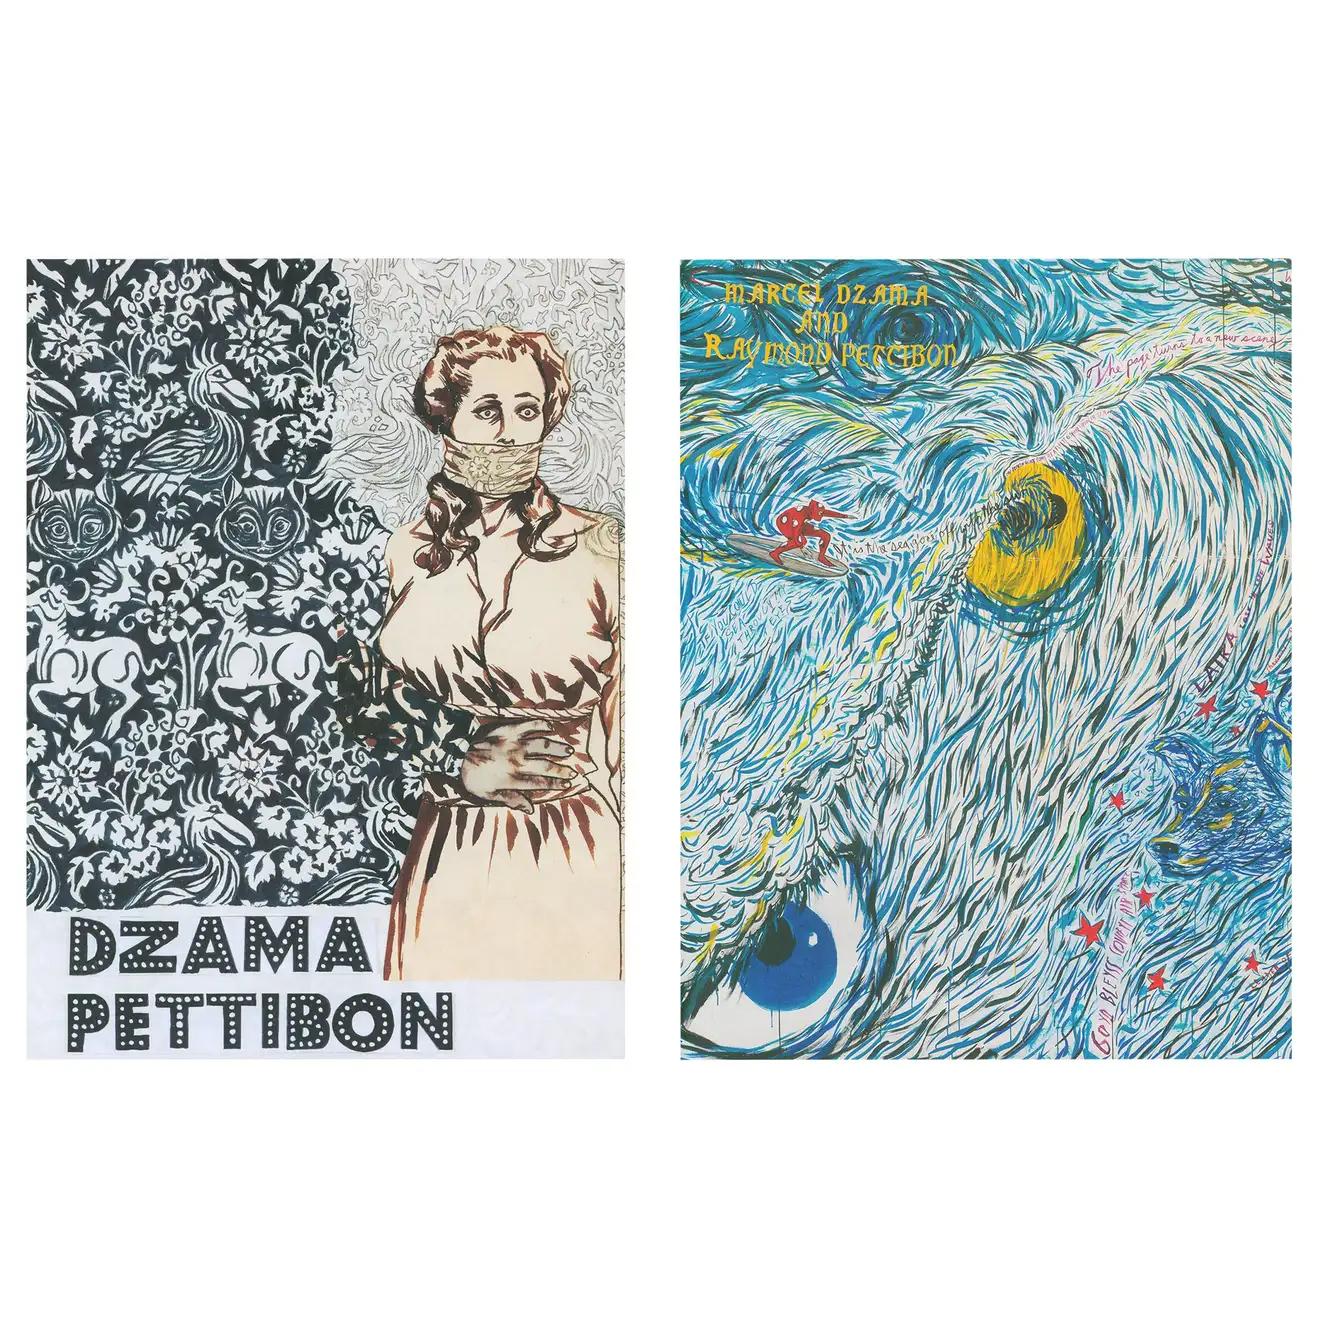 Raymond Pettibon & Marcel Dzama artist books 2016 (set of 2):
1) Dzama / Pettibon is a collaborative zine between Marcel Dzama and Raymond Pettibon. The zine was originally for the MoMa PS1 NYABF but sold out in one day. Published on the occasion of